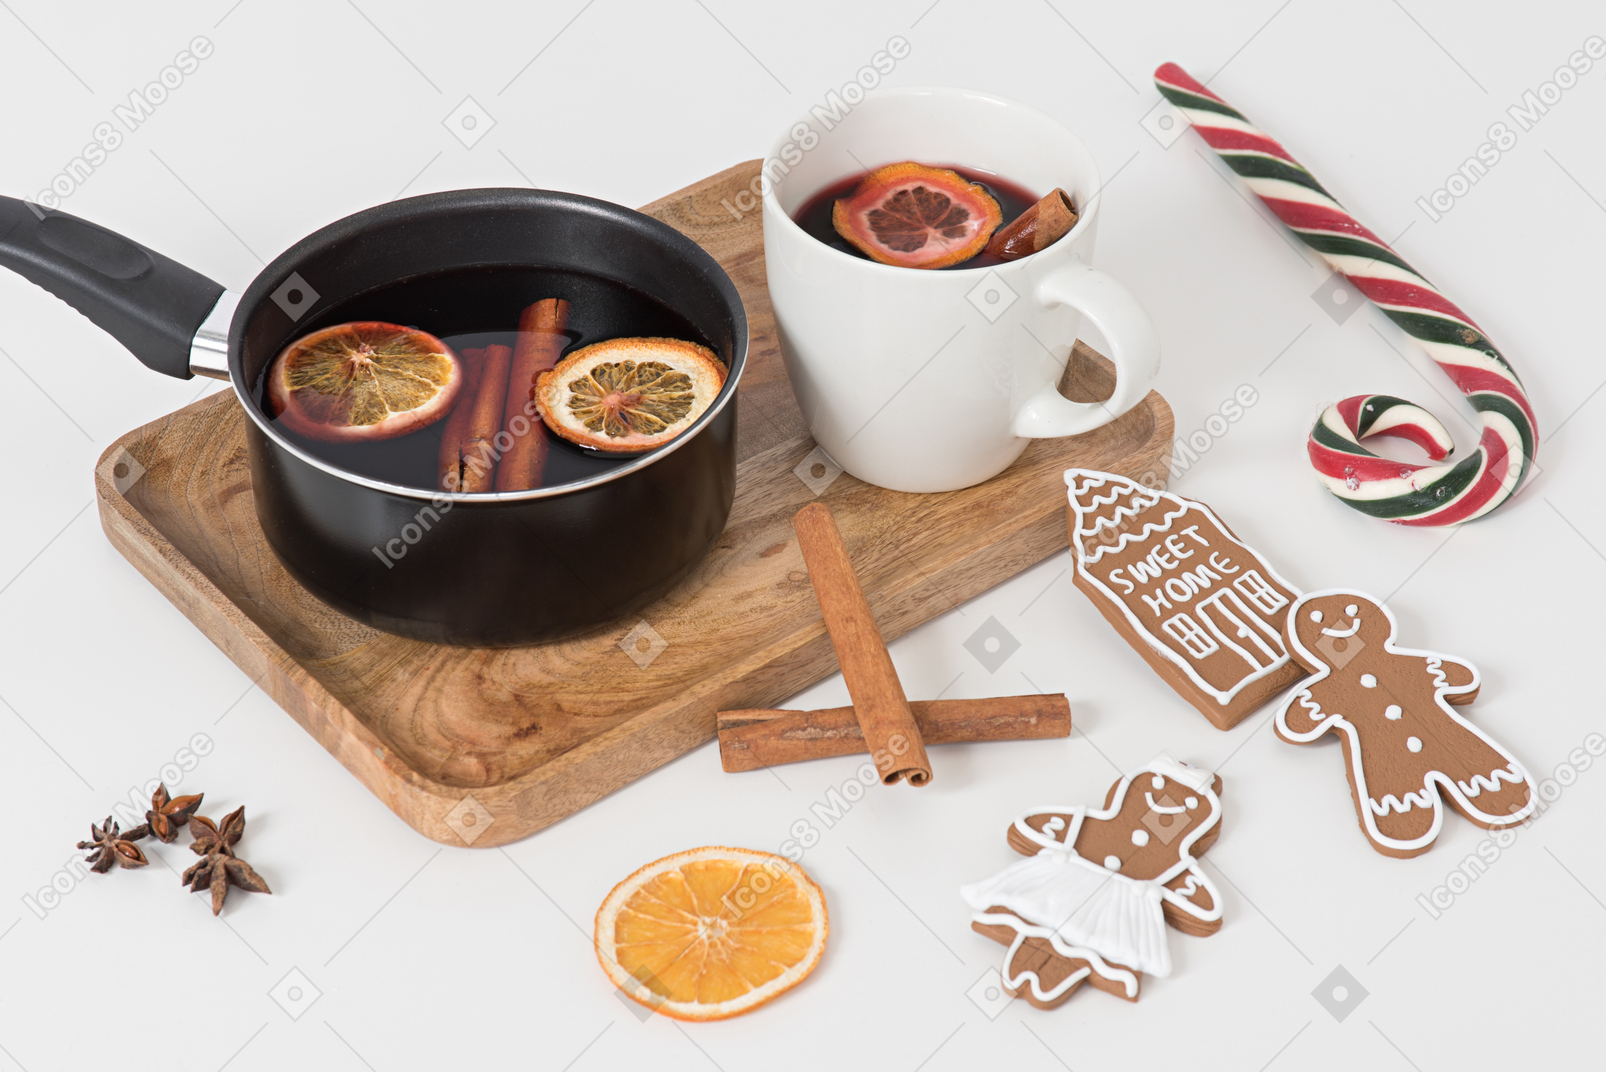 Mulled wine and ginger cookies are about winter time